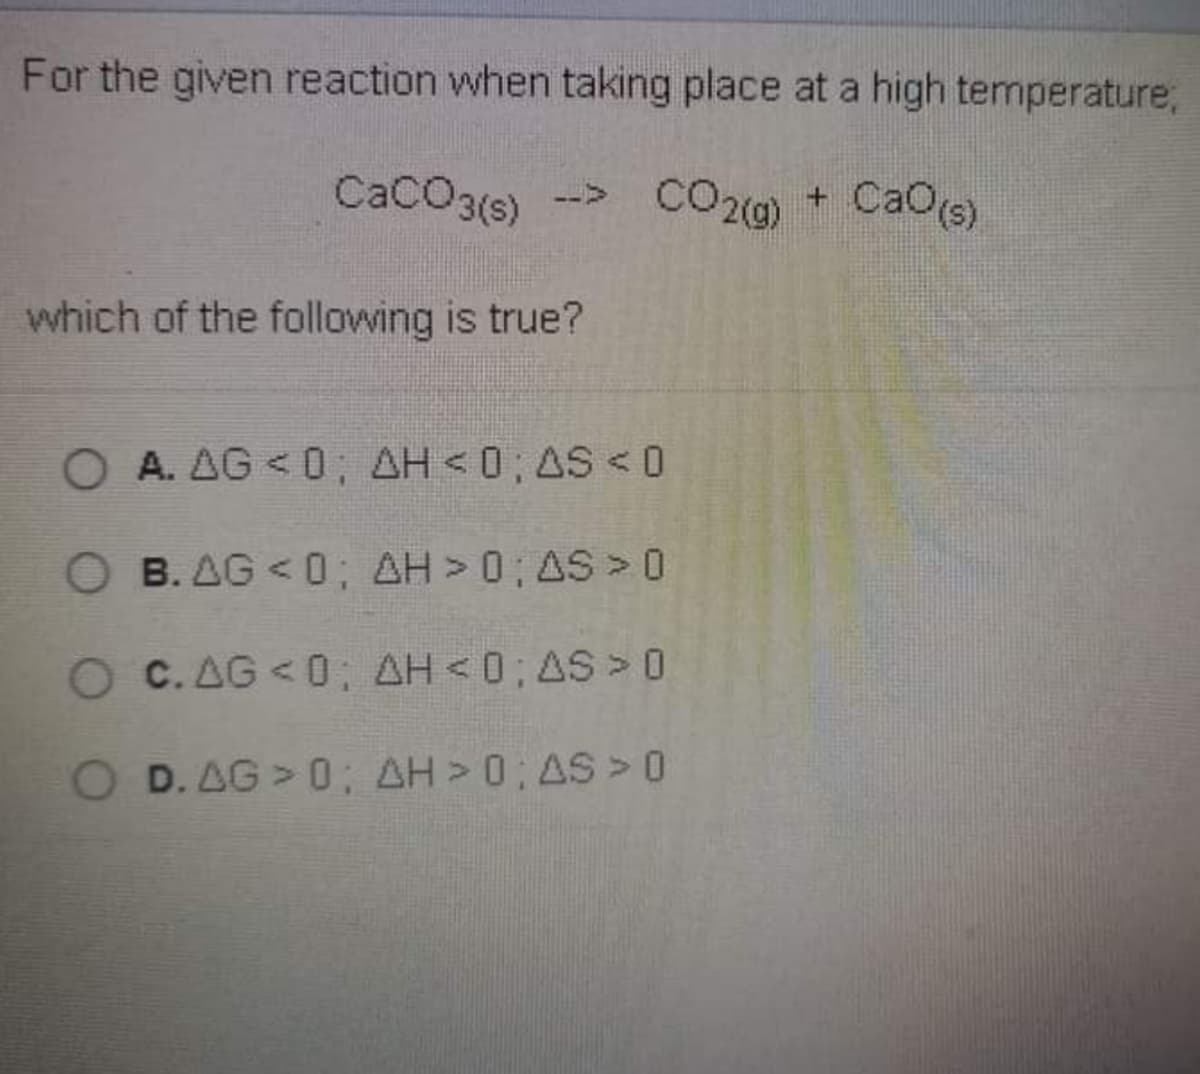 For the given reaction when taking place at a high temperature,
CaCO3(s)
--> CO20)
CO20) + CaOs)
which of the following is true?
OA. AG <0; AH <0; AS < 0
B. AG < 0; AH > 0 AS > 0
O C. AG < 0: AH <0; AS > O
D. AG > 0; AH > 0; AS >0
